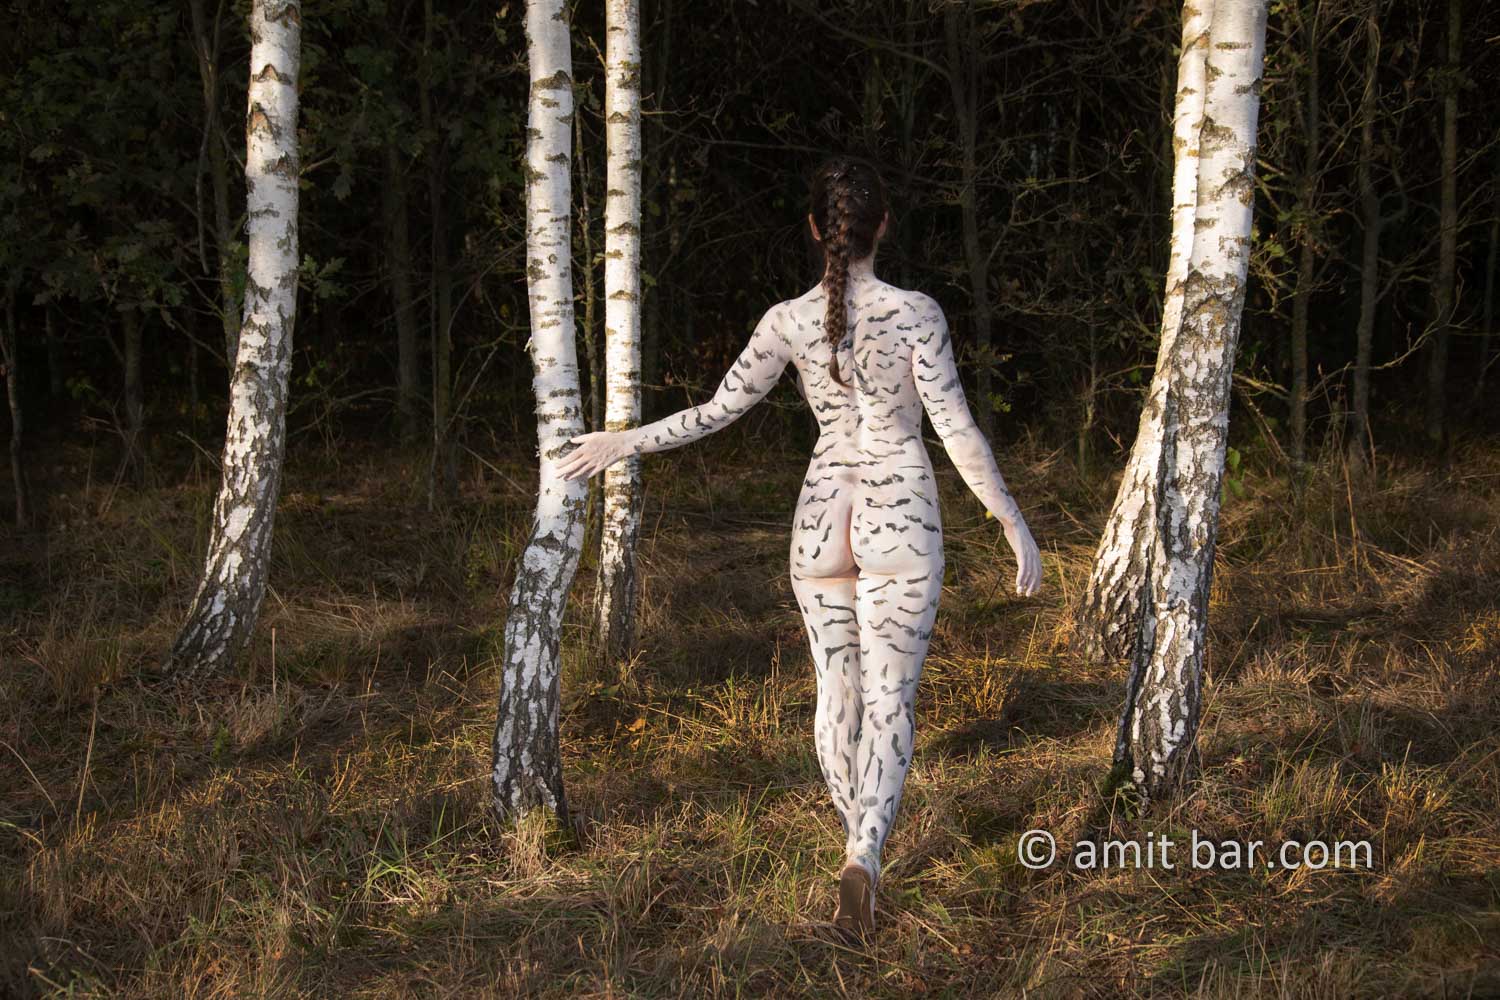 Birches grove I: A body-painting model is strolling among the white trunks of birch trees in De Achterhoek, The Netherlands